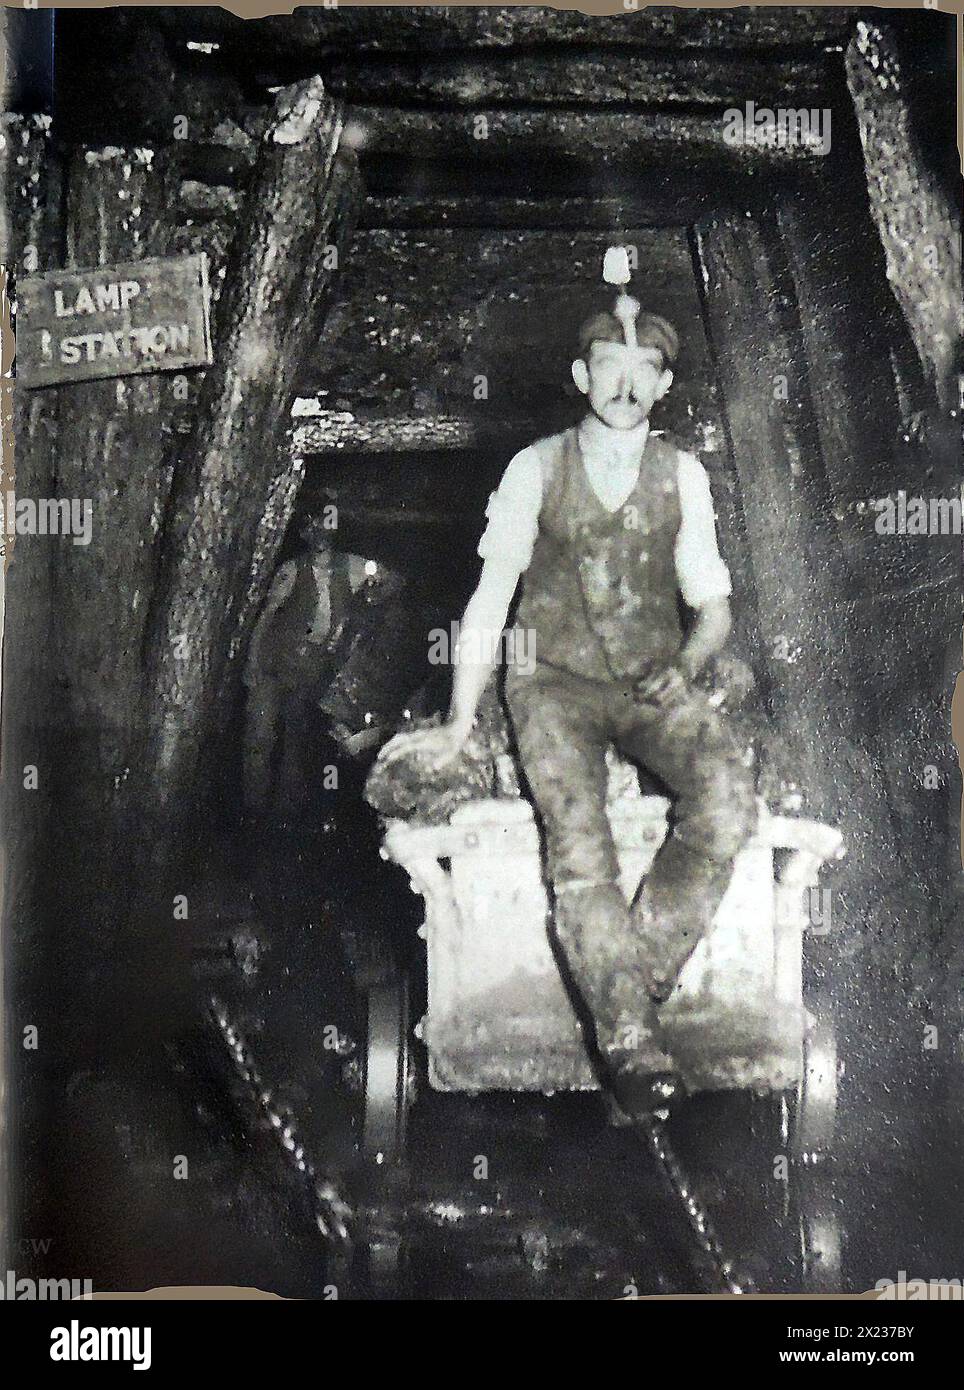 Coal Mining in Britain. An old photograph showing a young coal miner near the Lamp Station, underground at a Welsh coal mine. Stock Photo